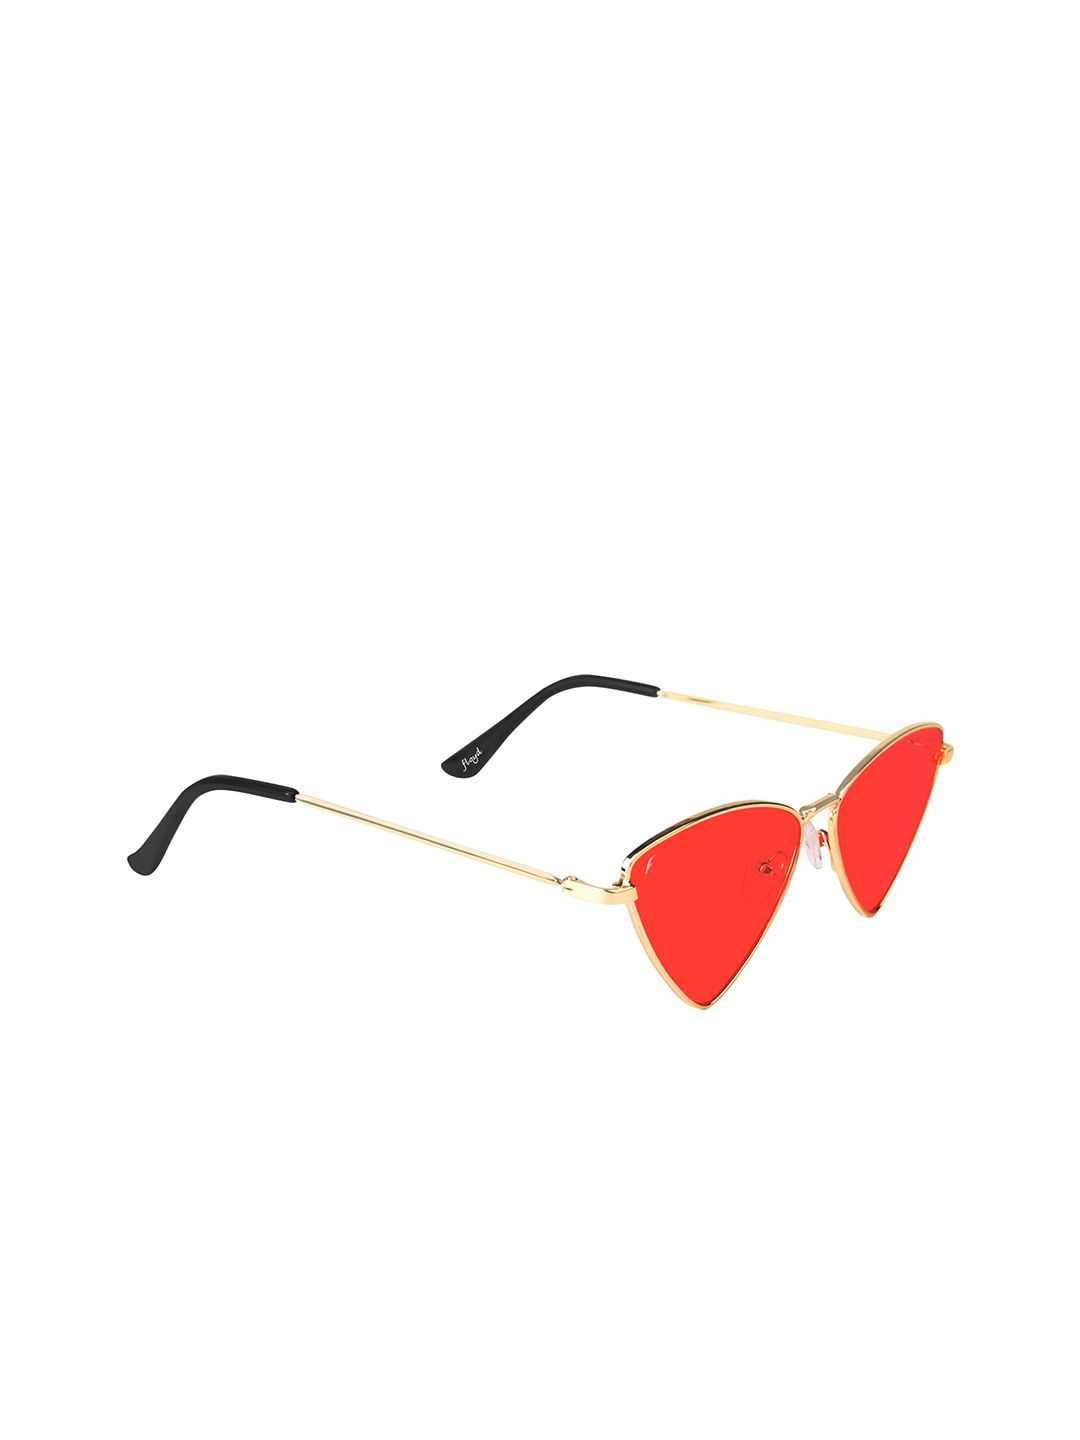 Floyd Unisex Red Lens & Gold-Toned Other Sunglasses with UV Protected Lens Price in India